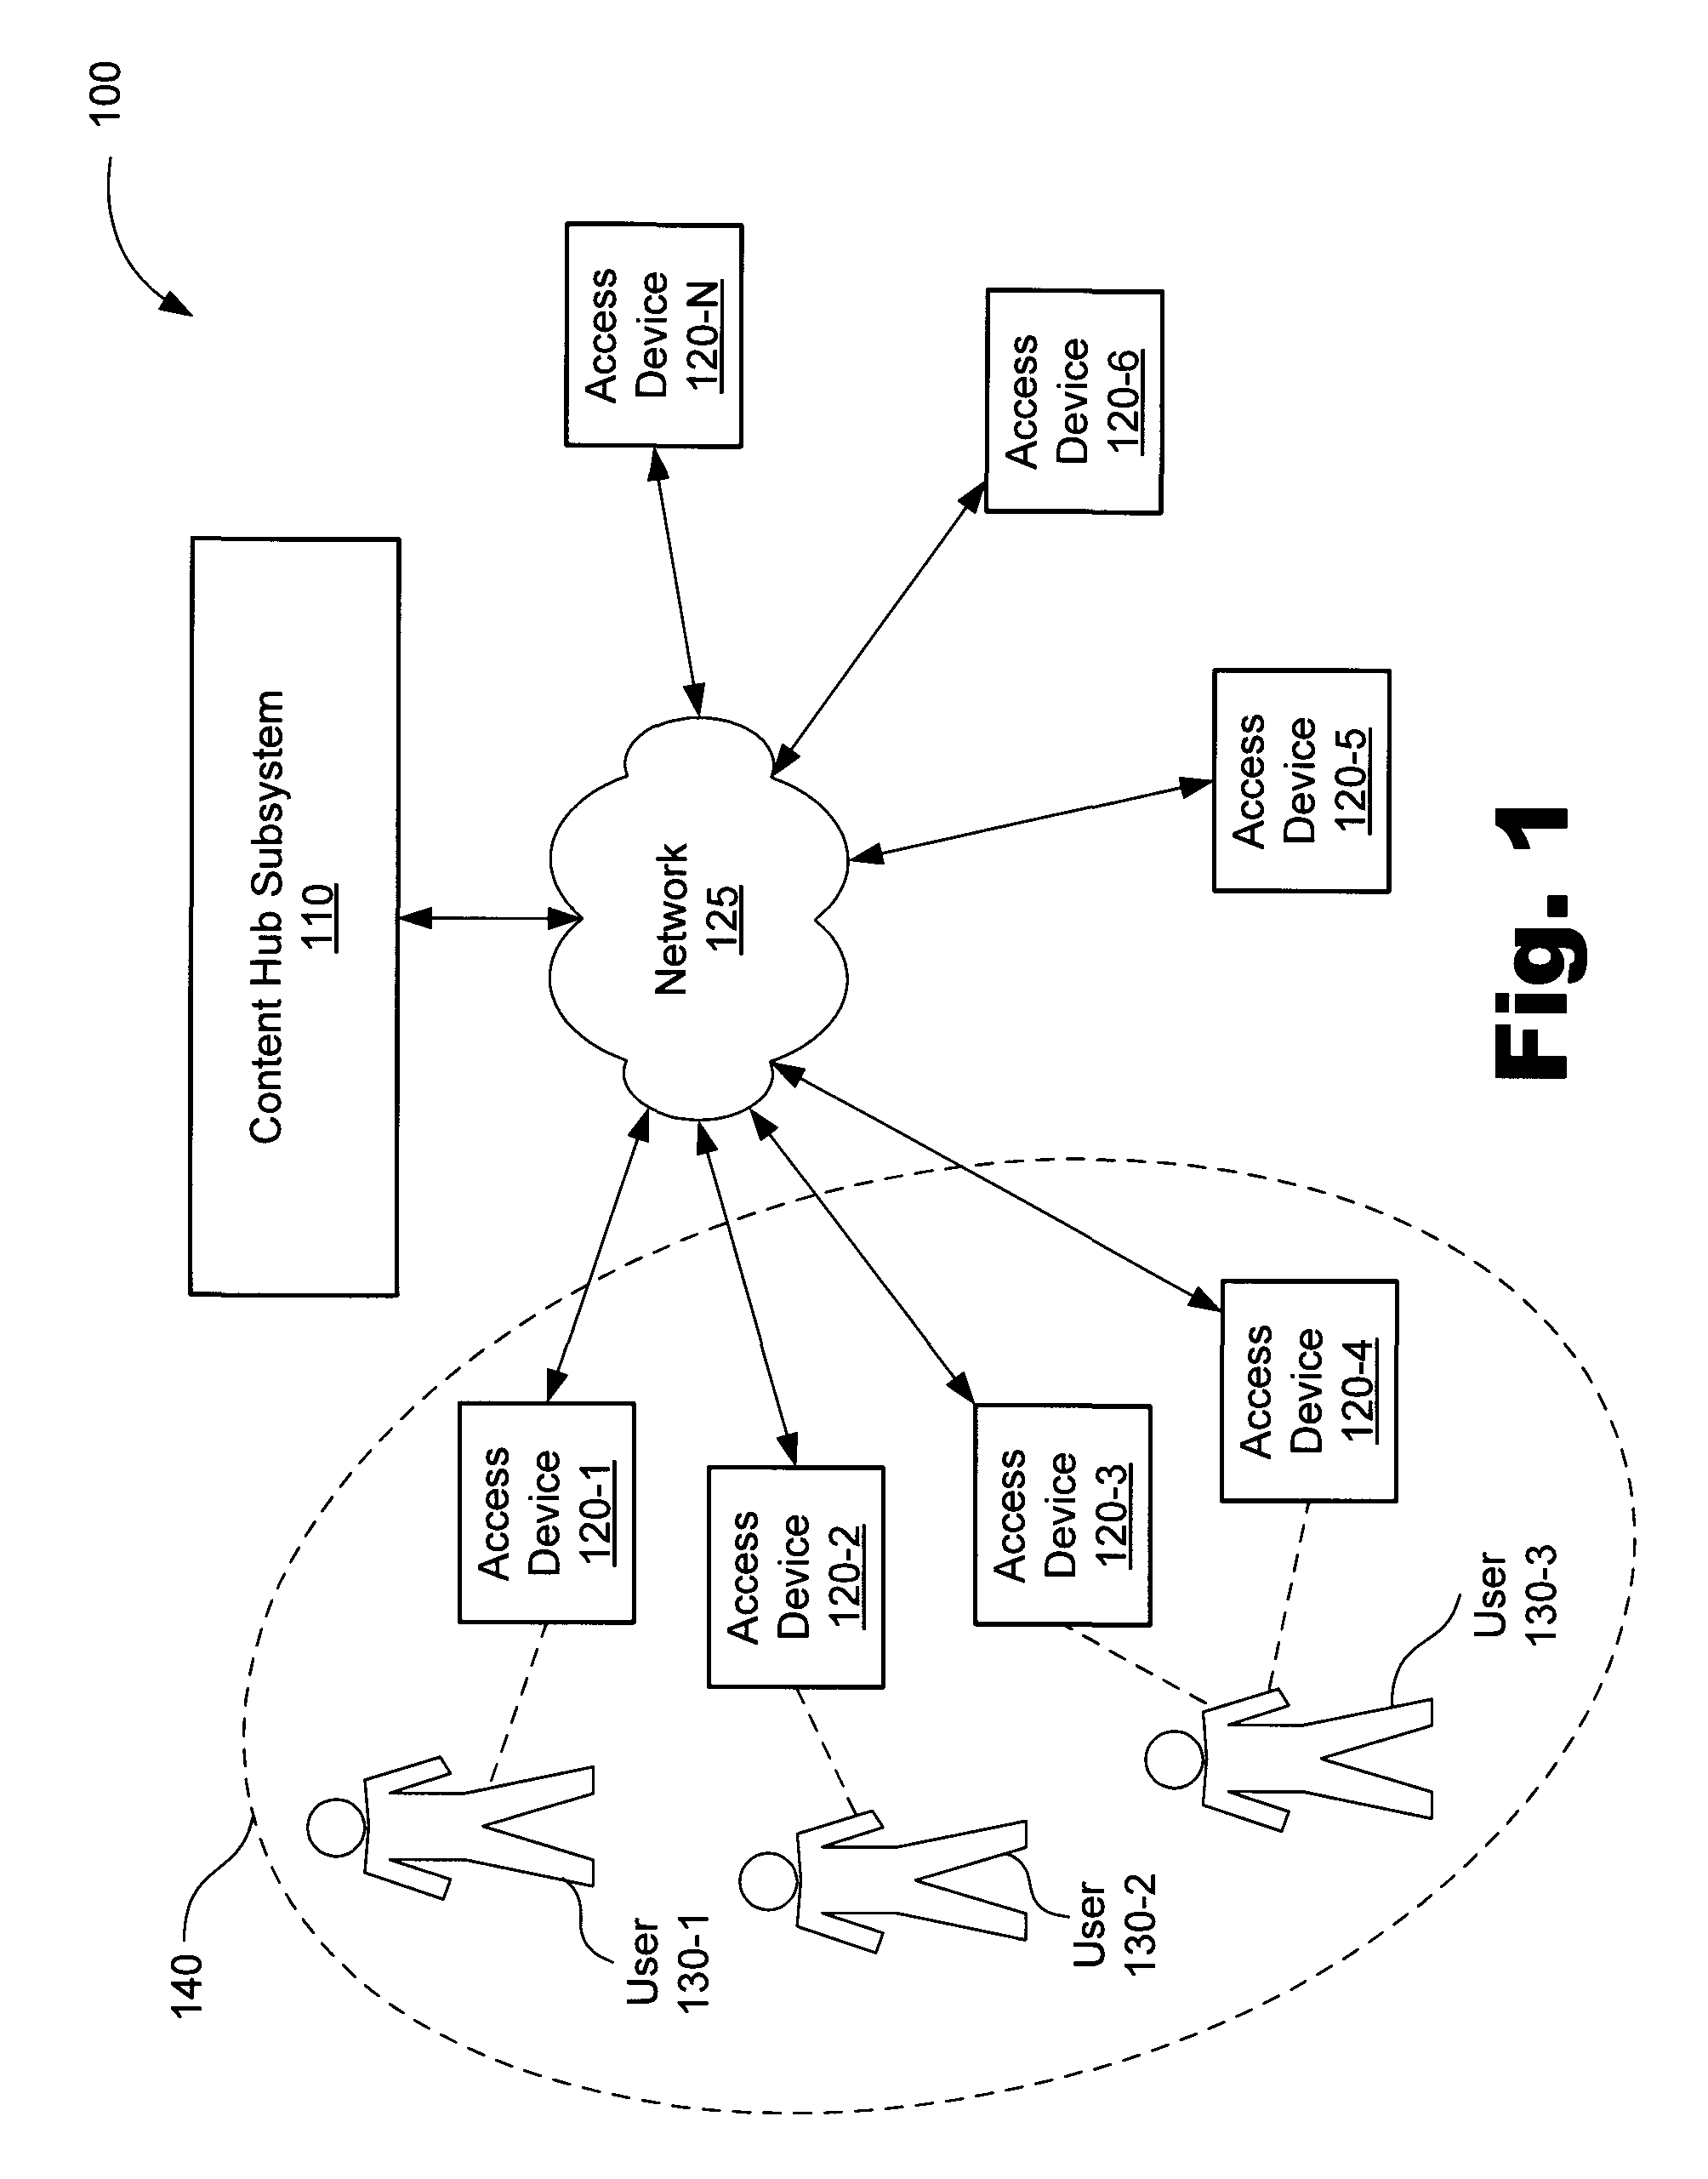 Interactive group content systems and methods